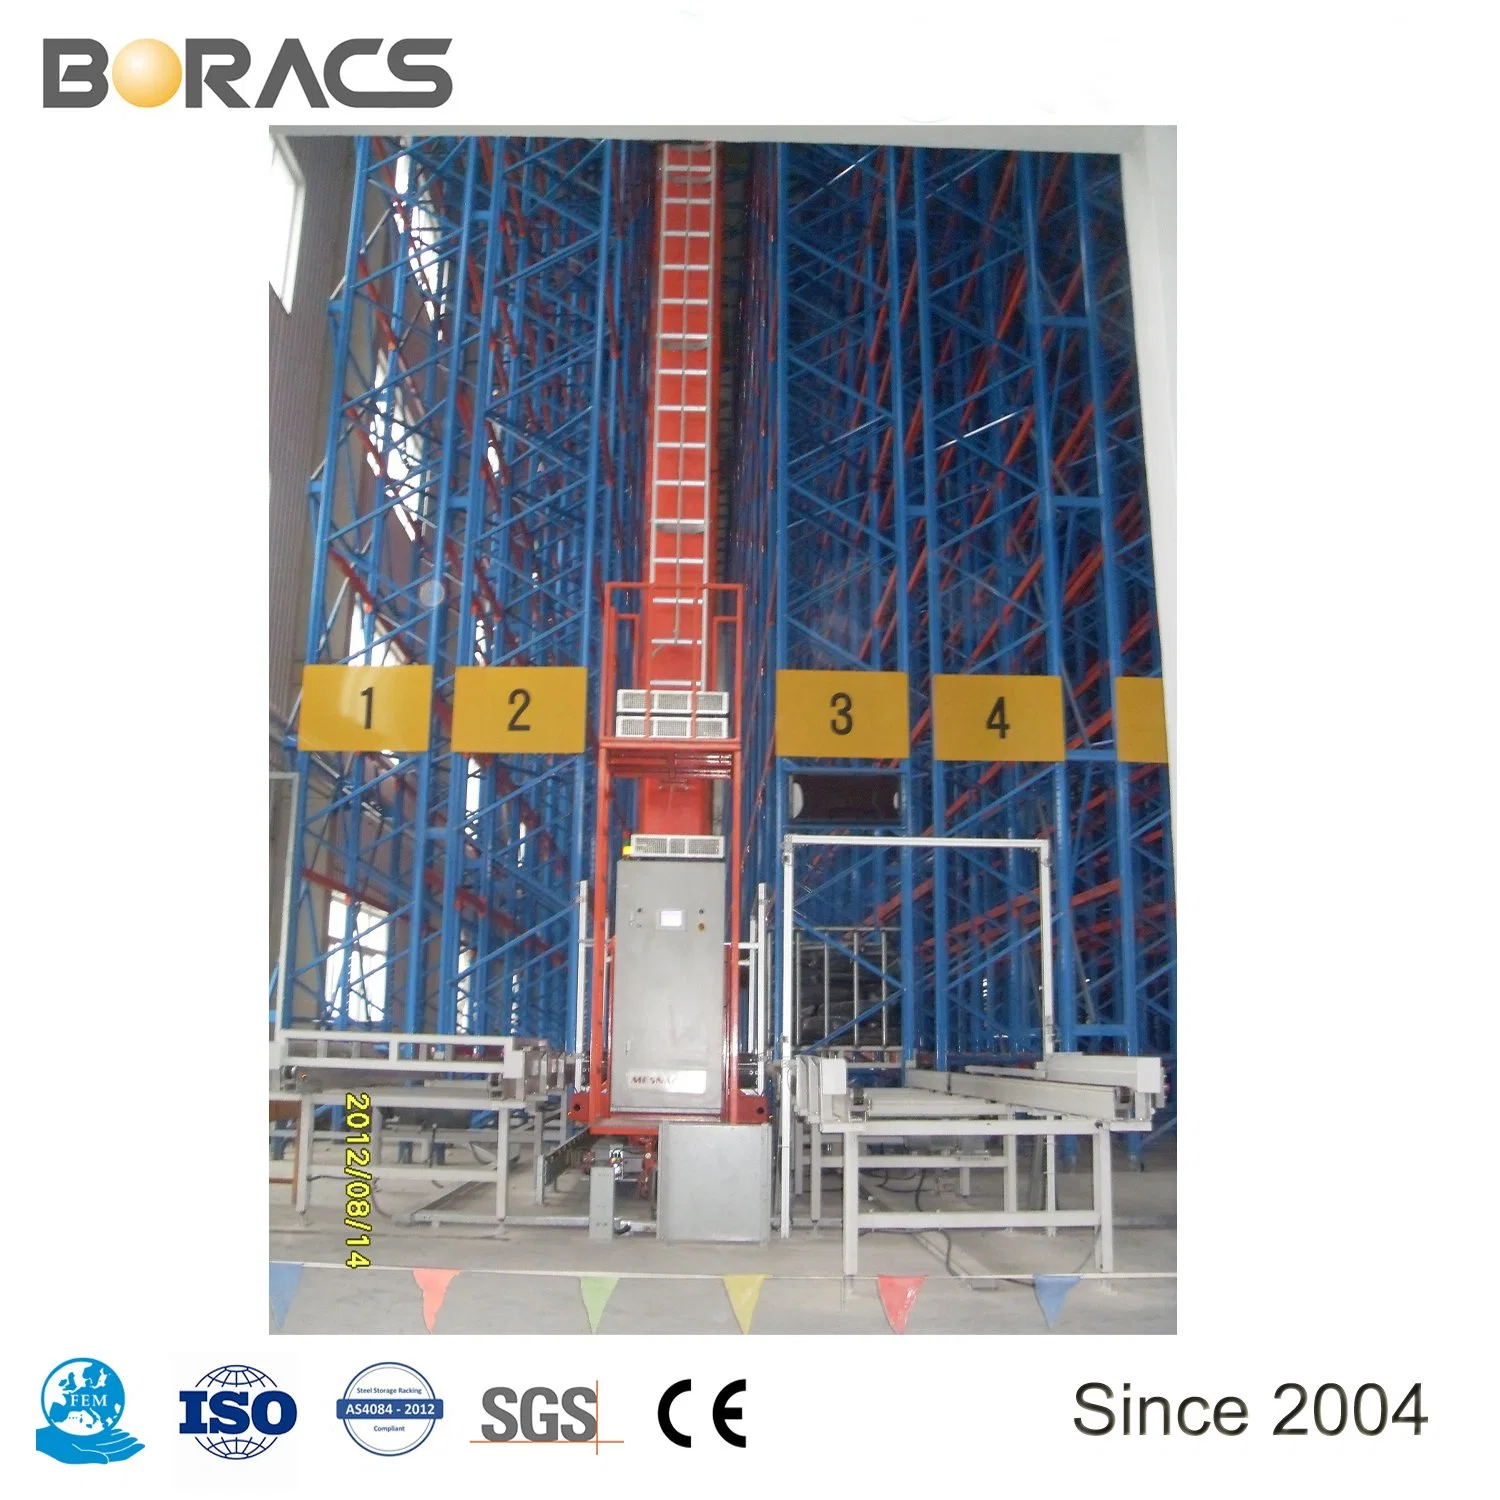 Warehouse Automatic Storage Retrieval System Advanced Control As4084 Certificate